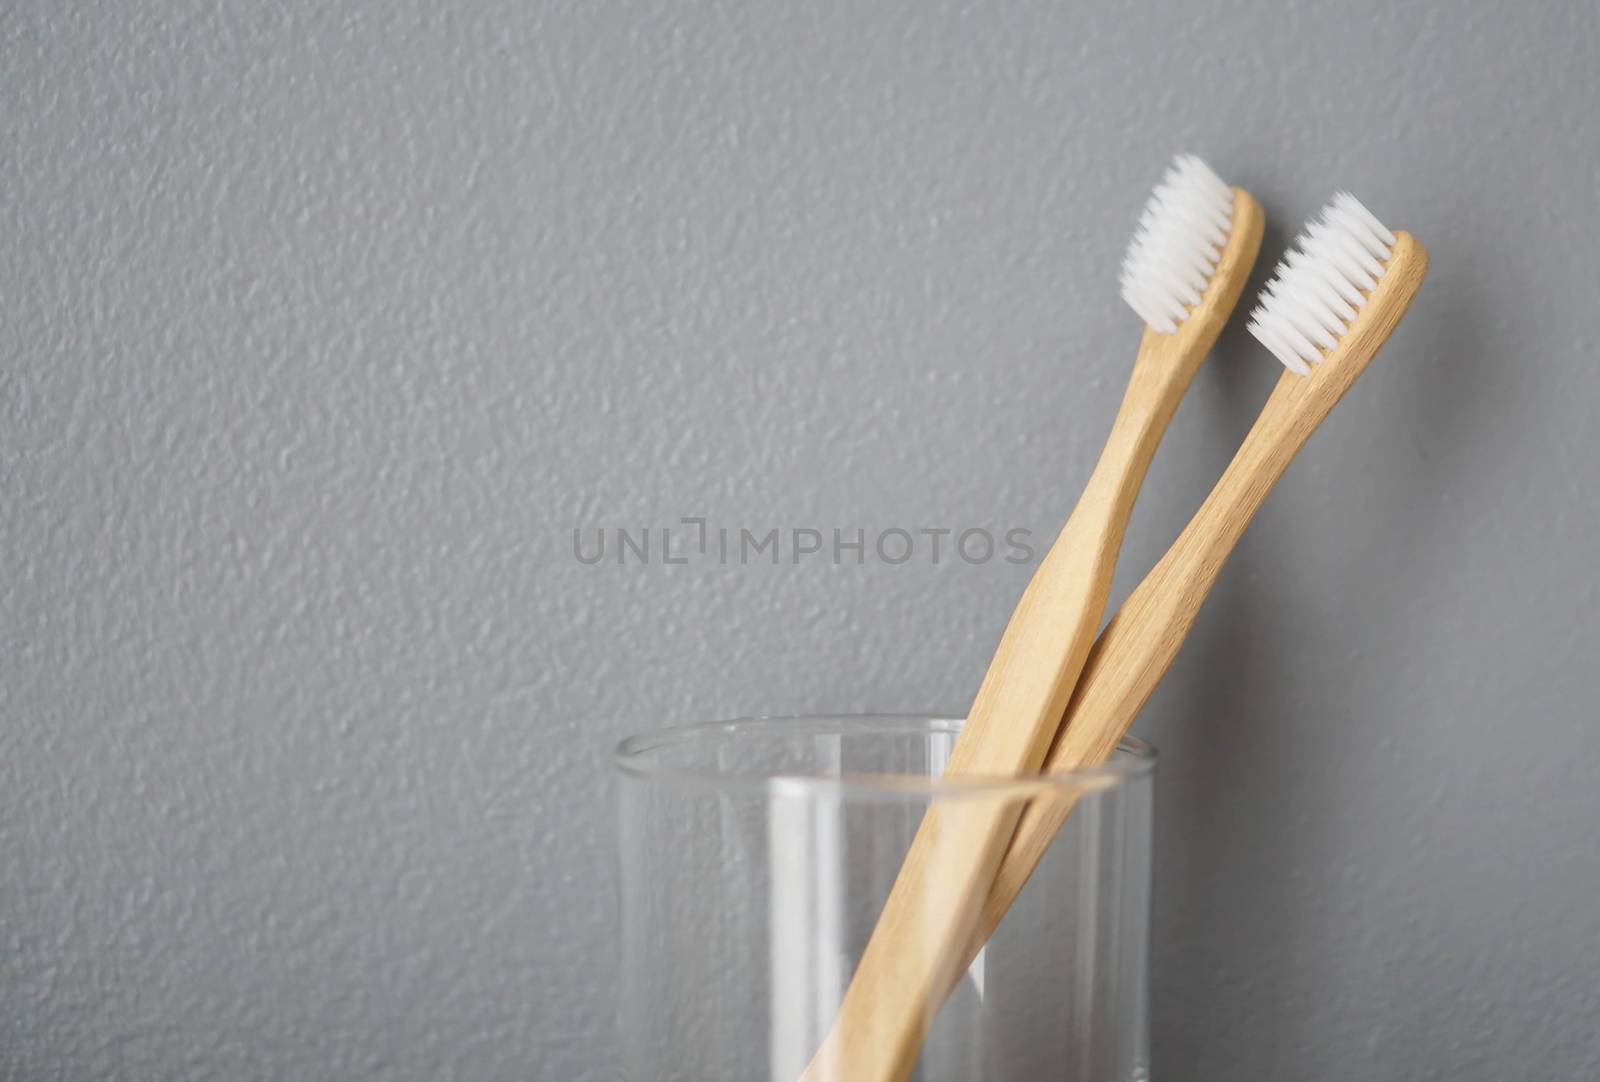 Close up wooden toothbrush in glass with grey background, select by pt.pongsak@gmail.com